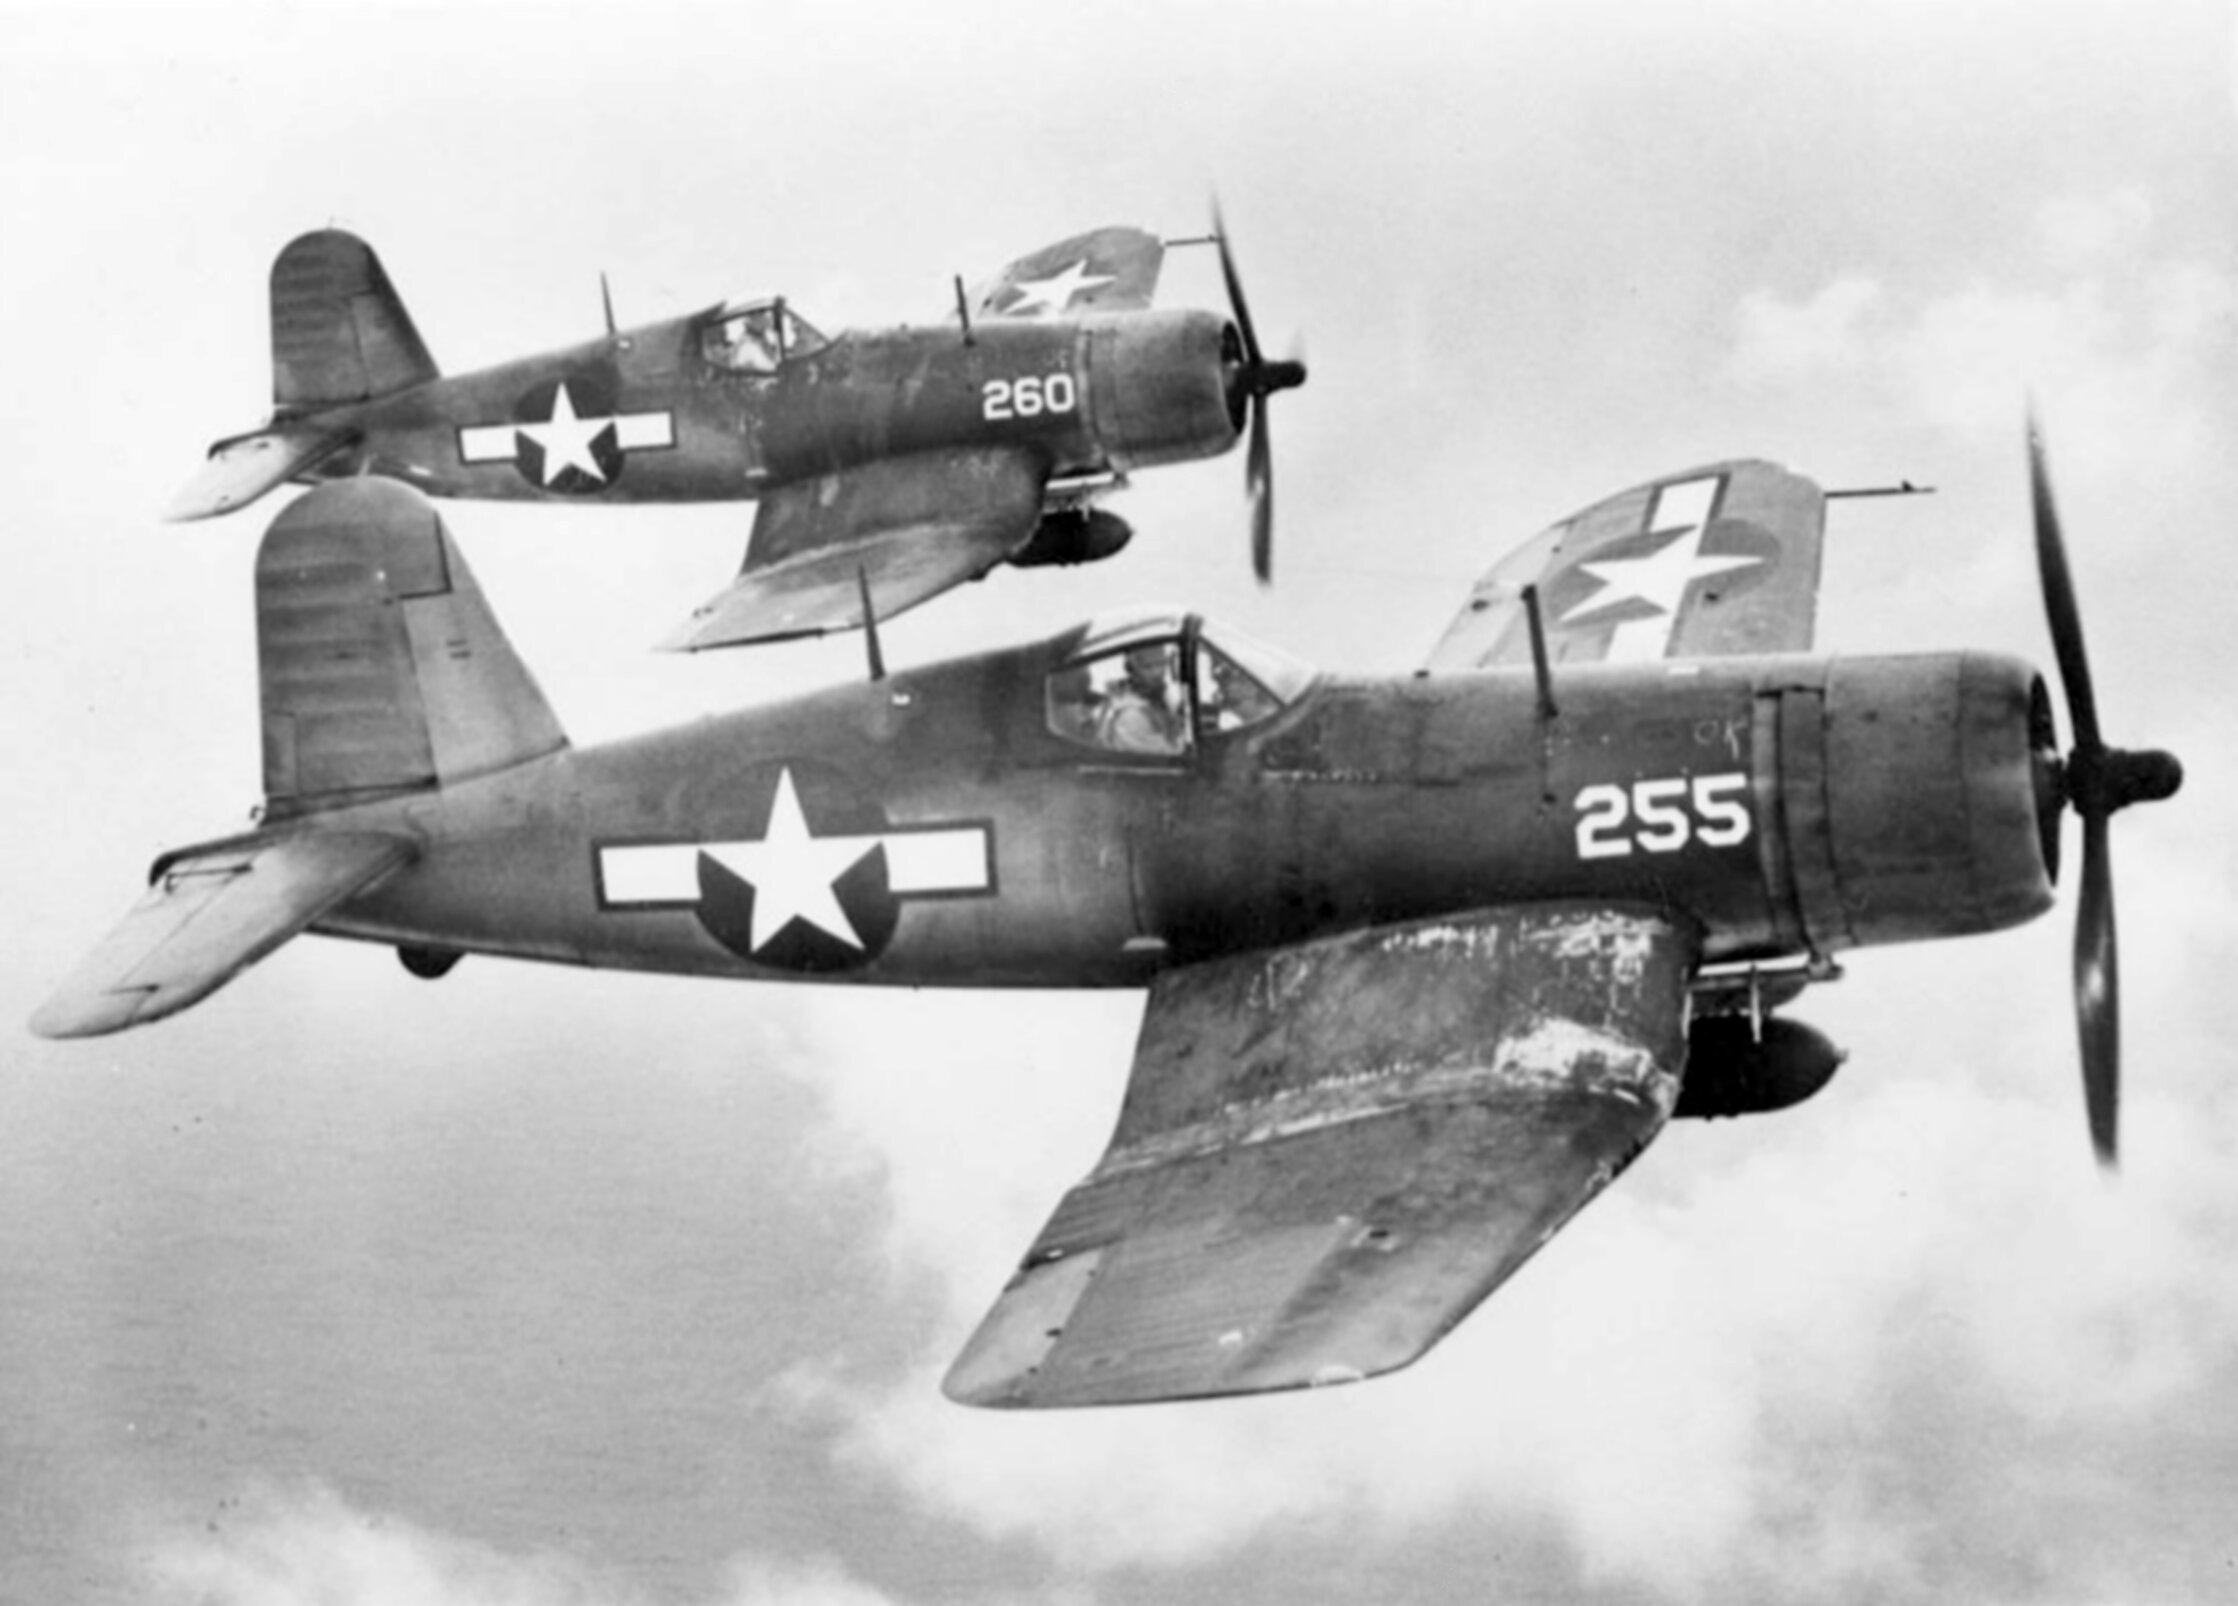 Vought-F4U-1A-Corsair-VMF-224-White-255-and-260-carring-1000-pound-bombs-1944-01.jpg